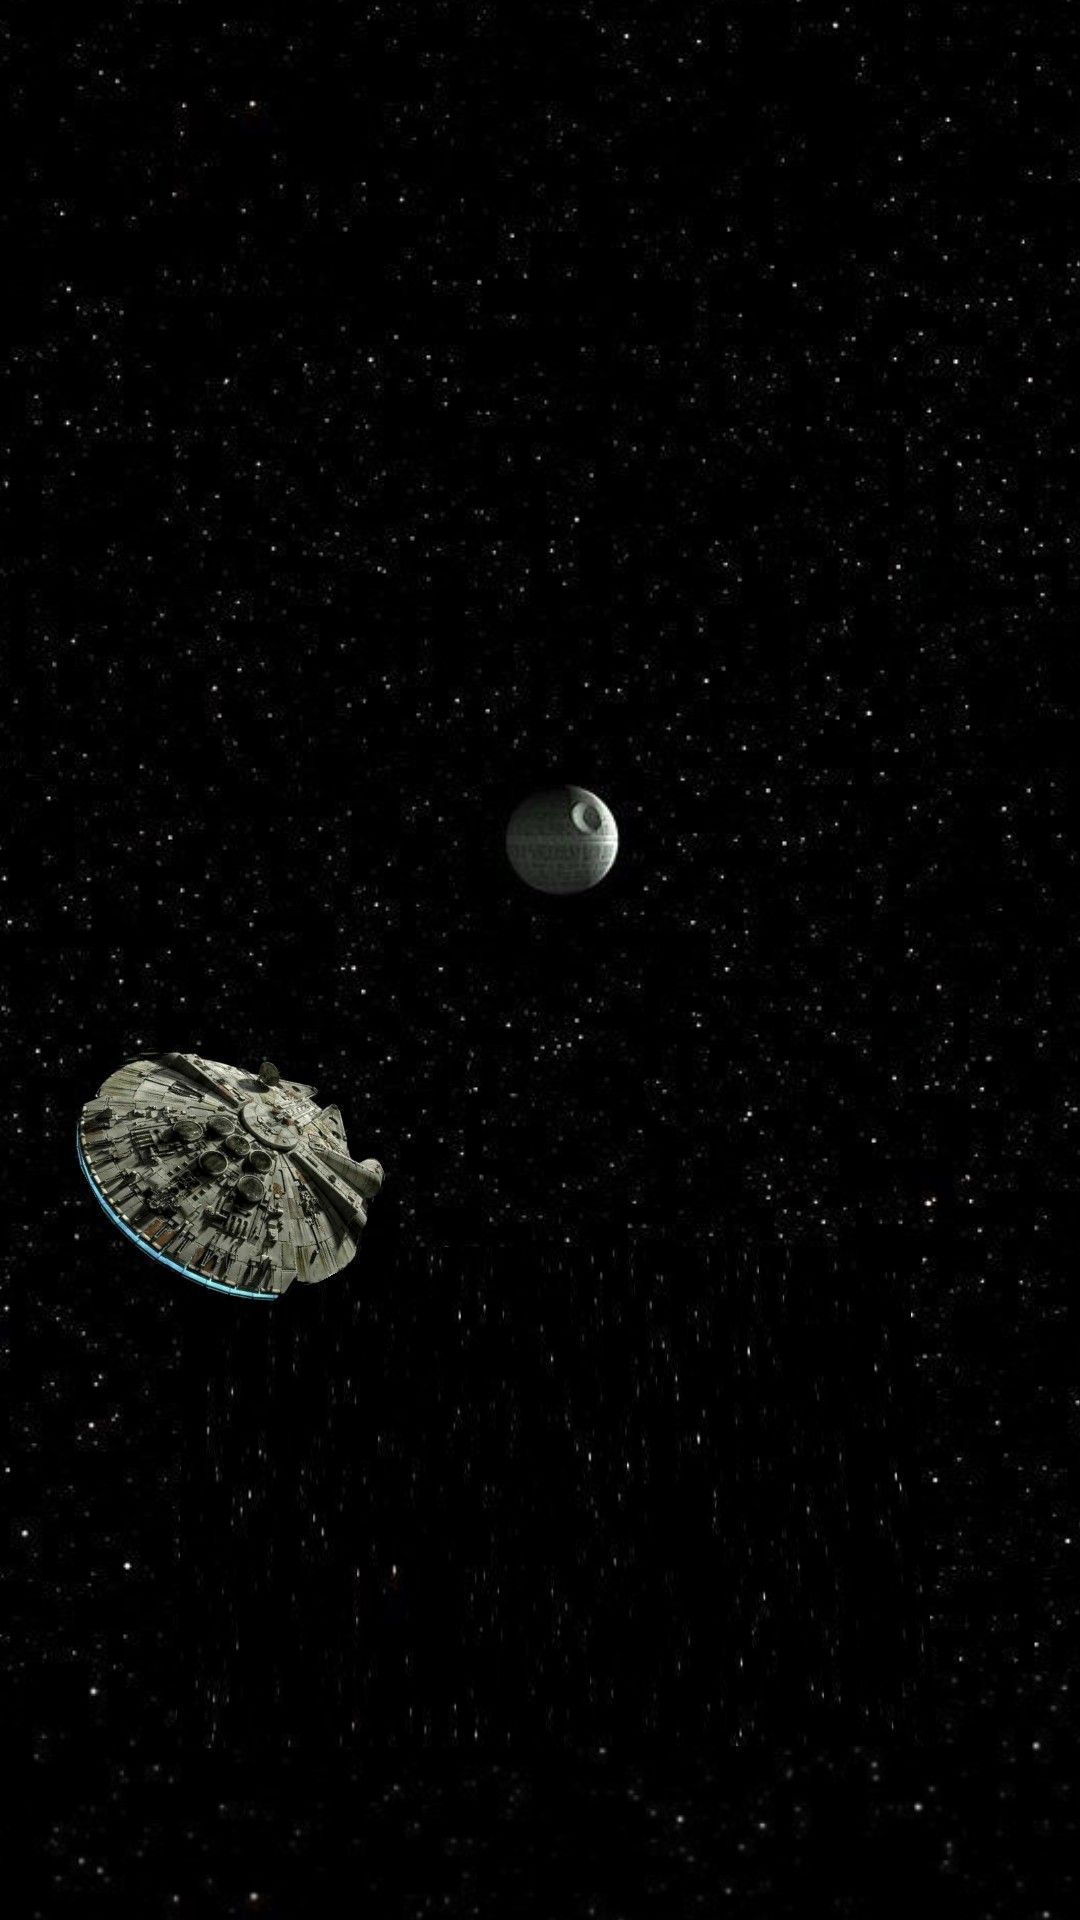 IPhone wallpaper of the Millennium Falcon and the Death Star from Star Wars - Star Wars